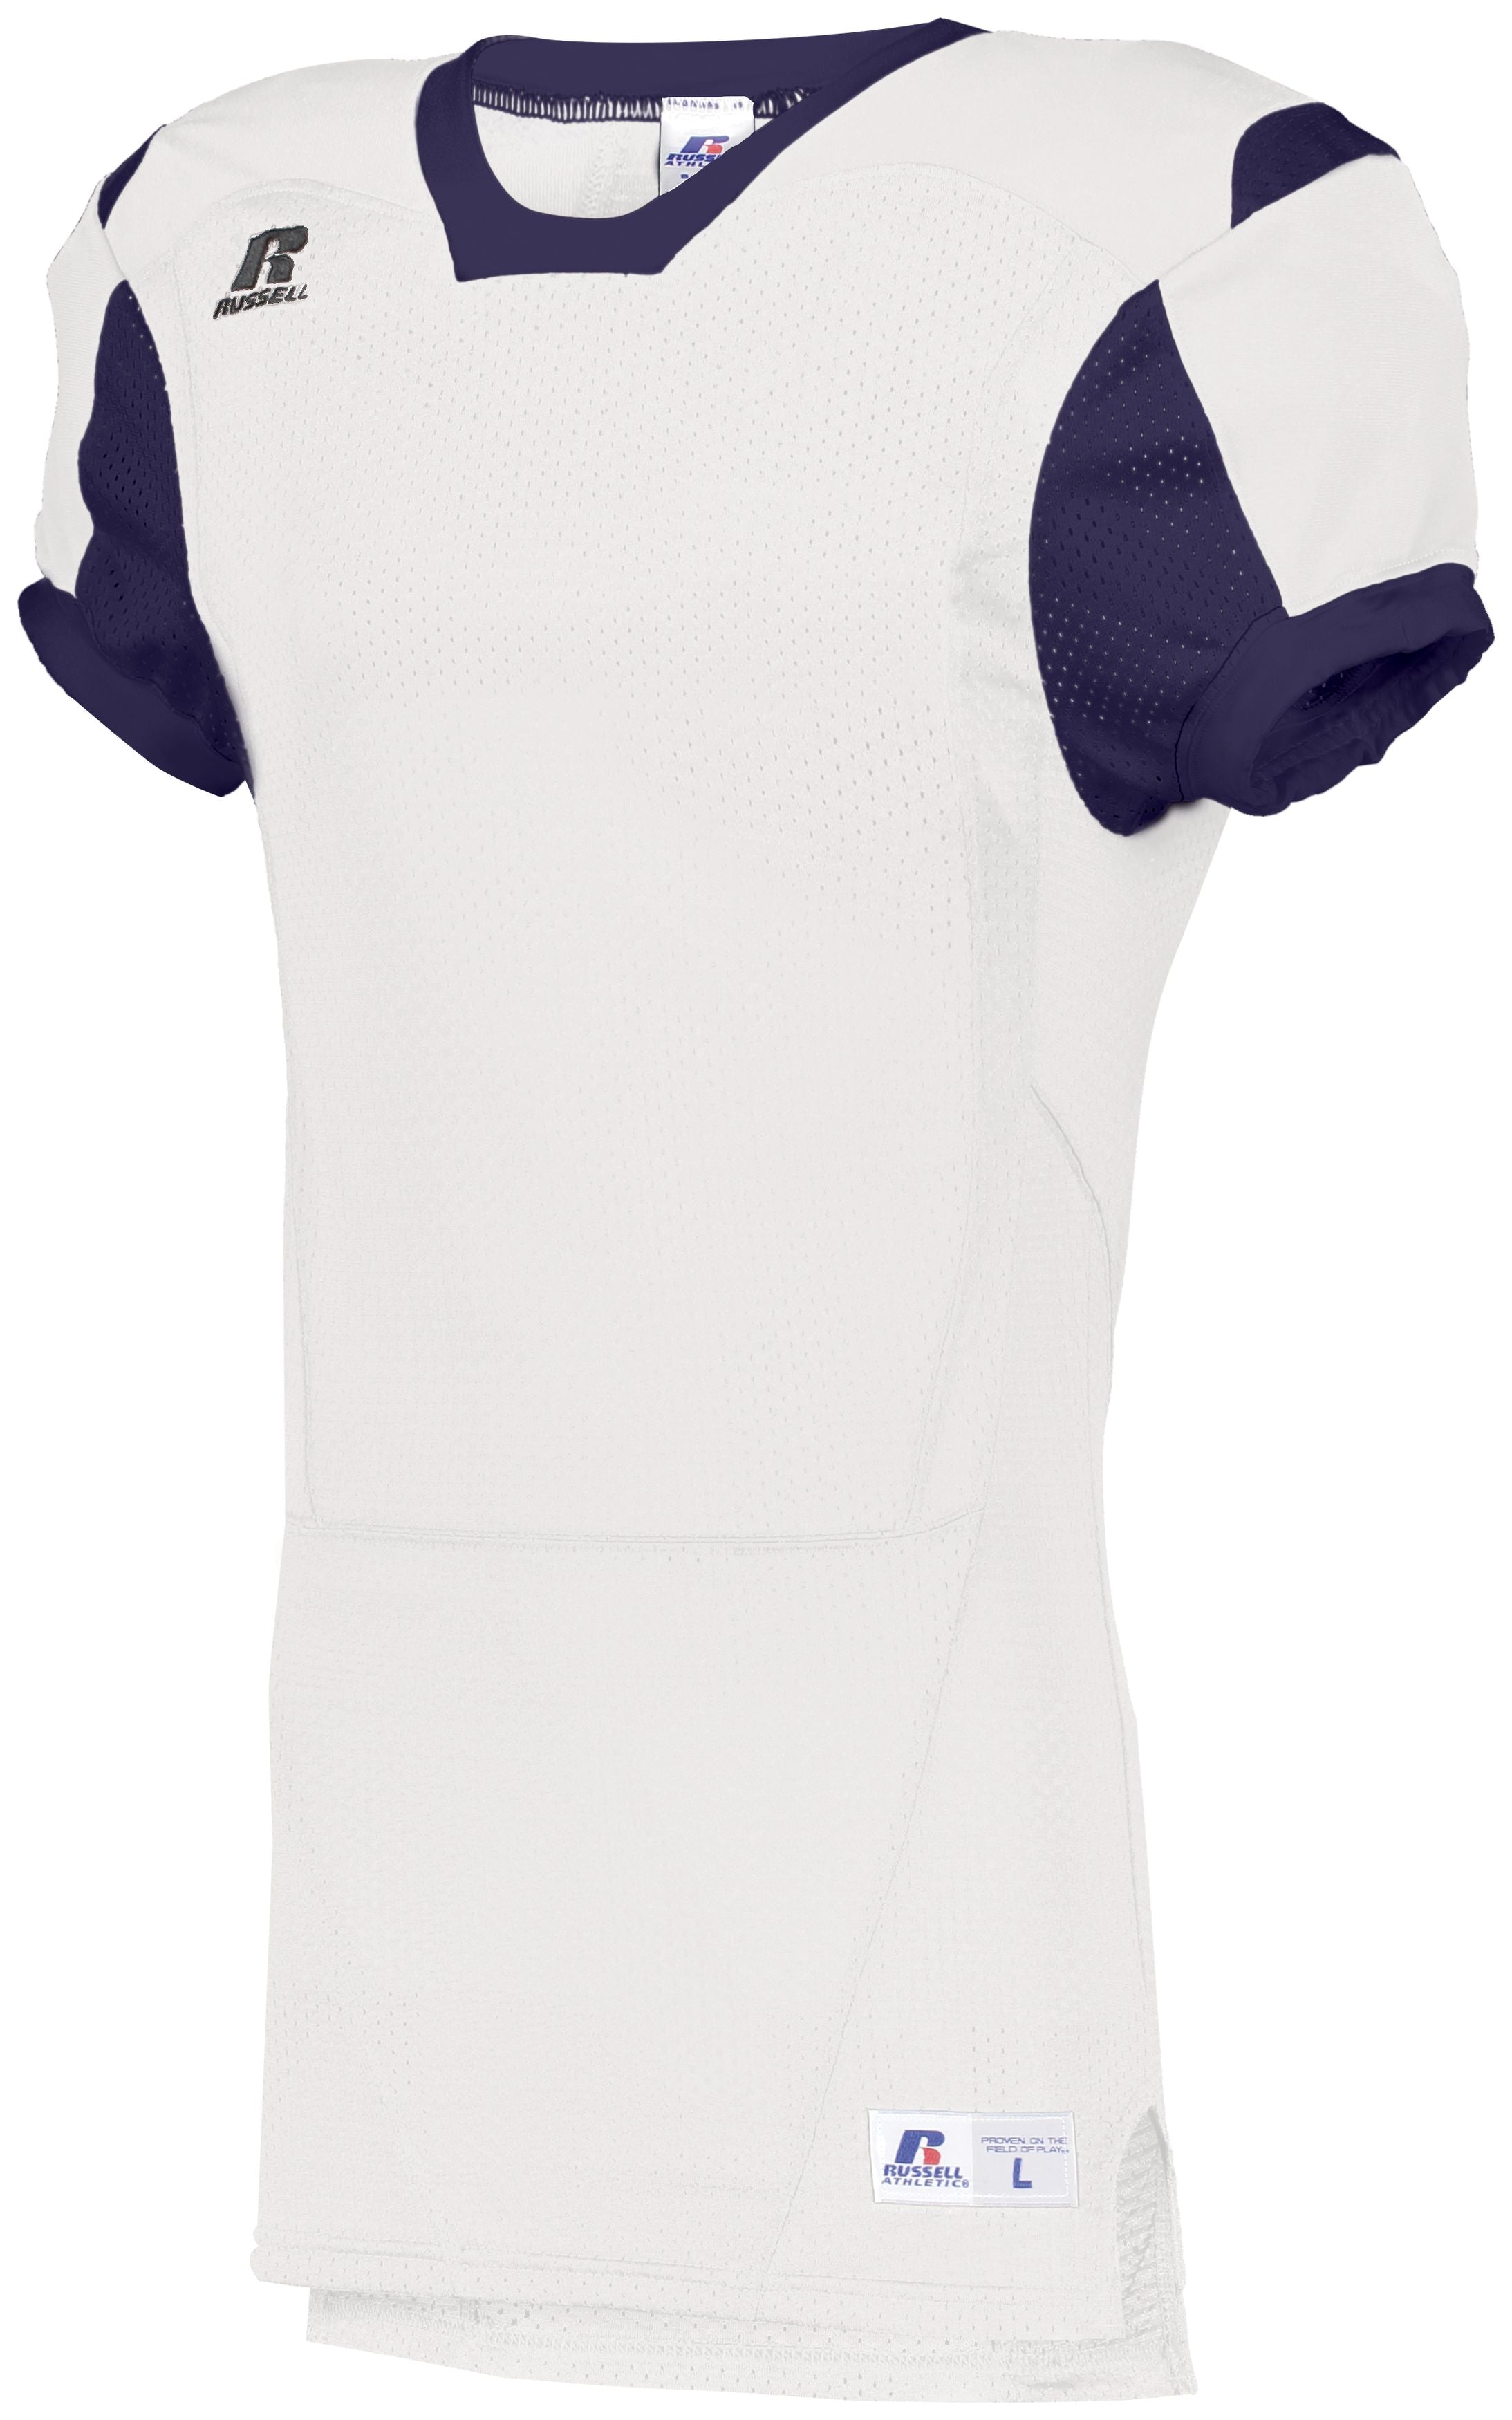 Russell Athletic Color Block Game Jersey in White/Purple  -Part of the Adult, Adult-Jersey, Football, Russell-Athletic-Products, Shirts, All-Sports, All-Sports-1 product lines at KanaleyCreations.com